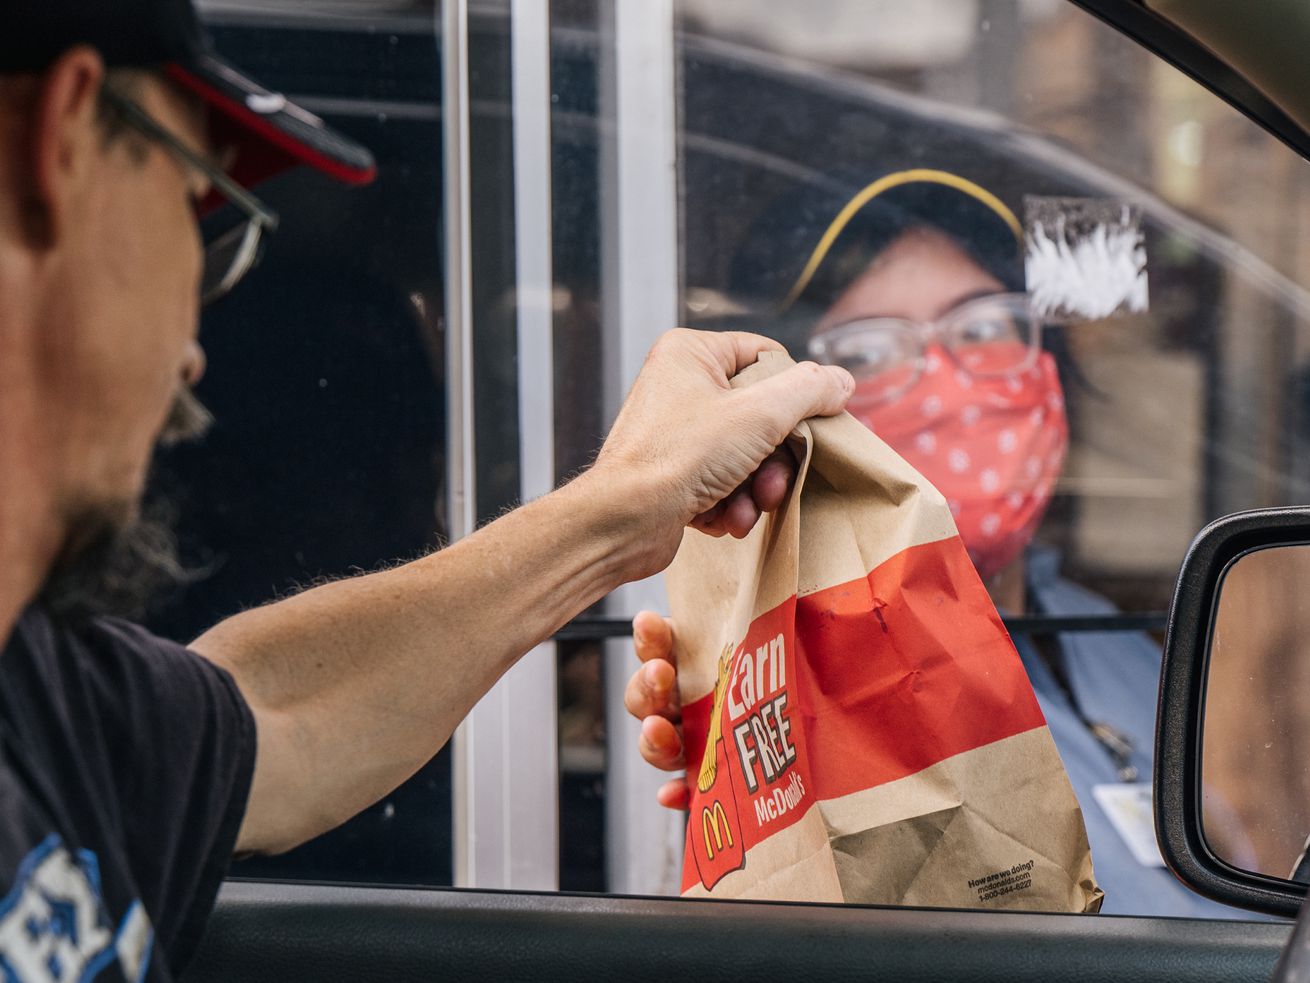 A McDonald’s worker hands a paper bag to a customer at a drive-through window in Houston, Texas.